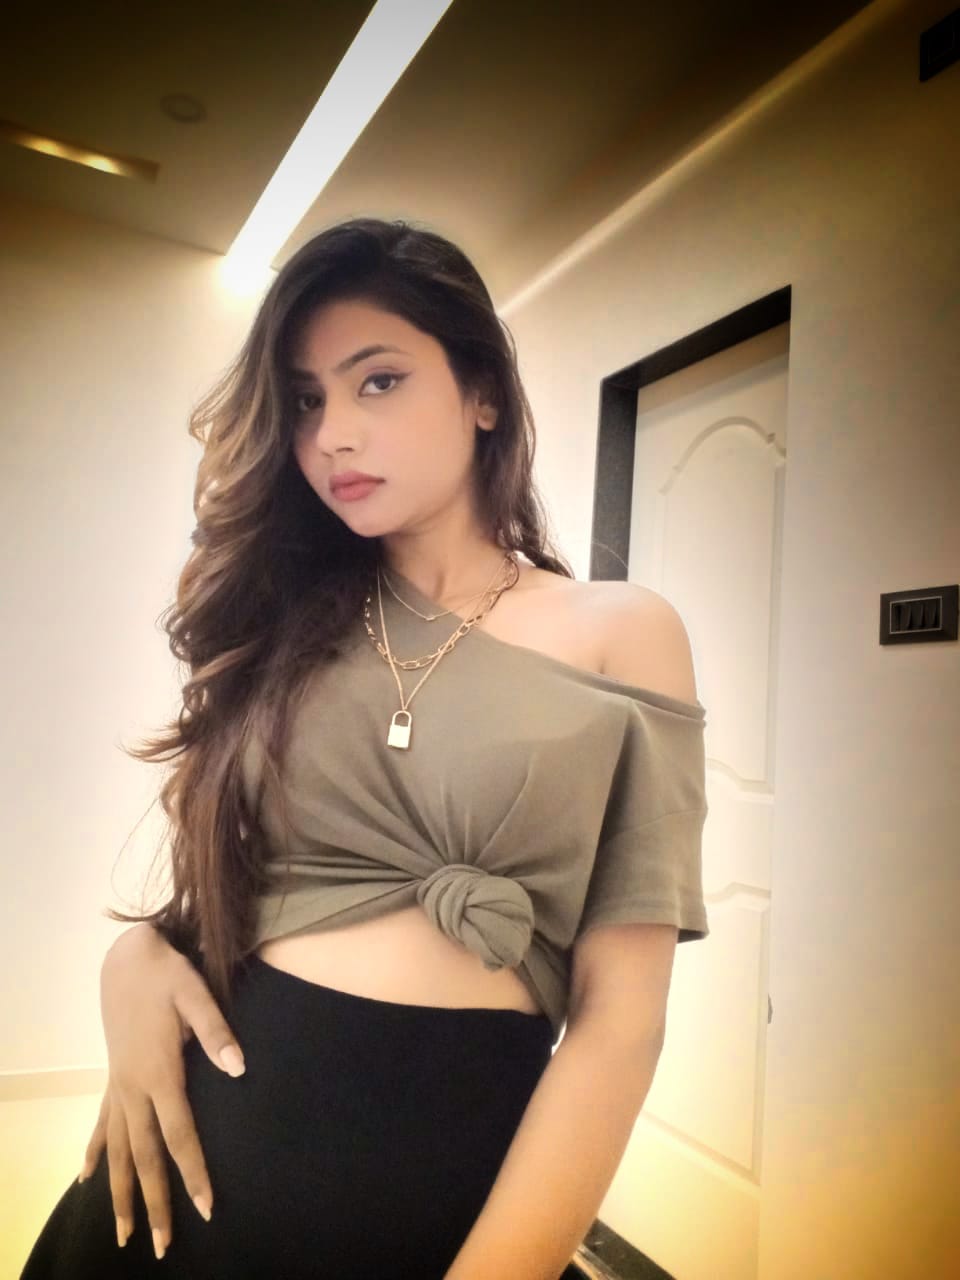 Want to have sex with a busty girl in Gaya